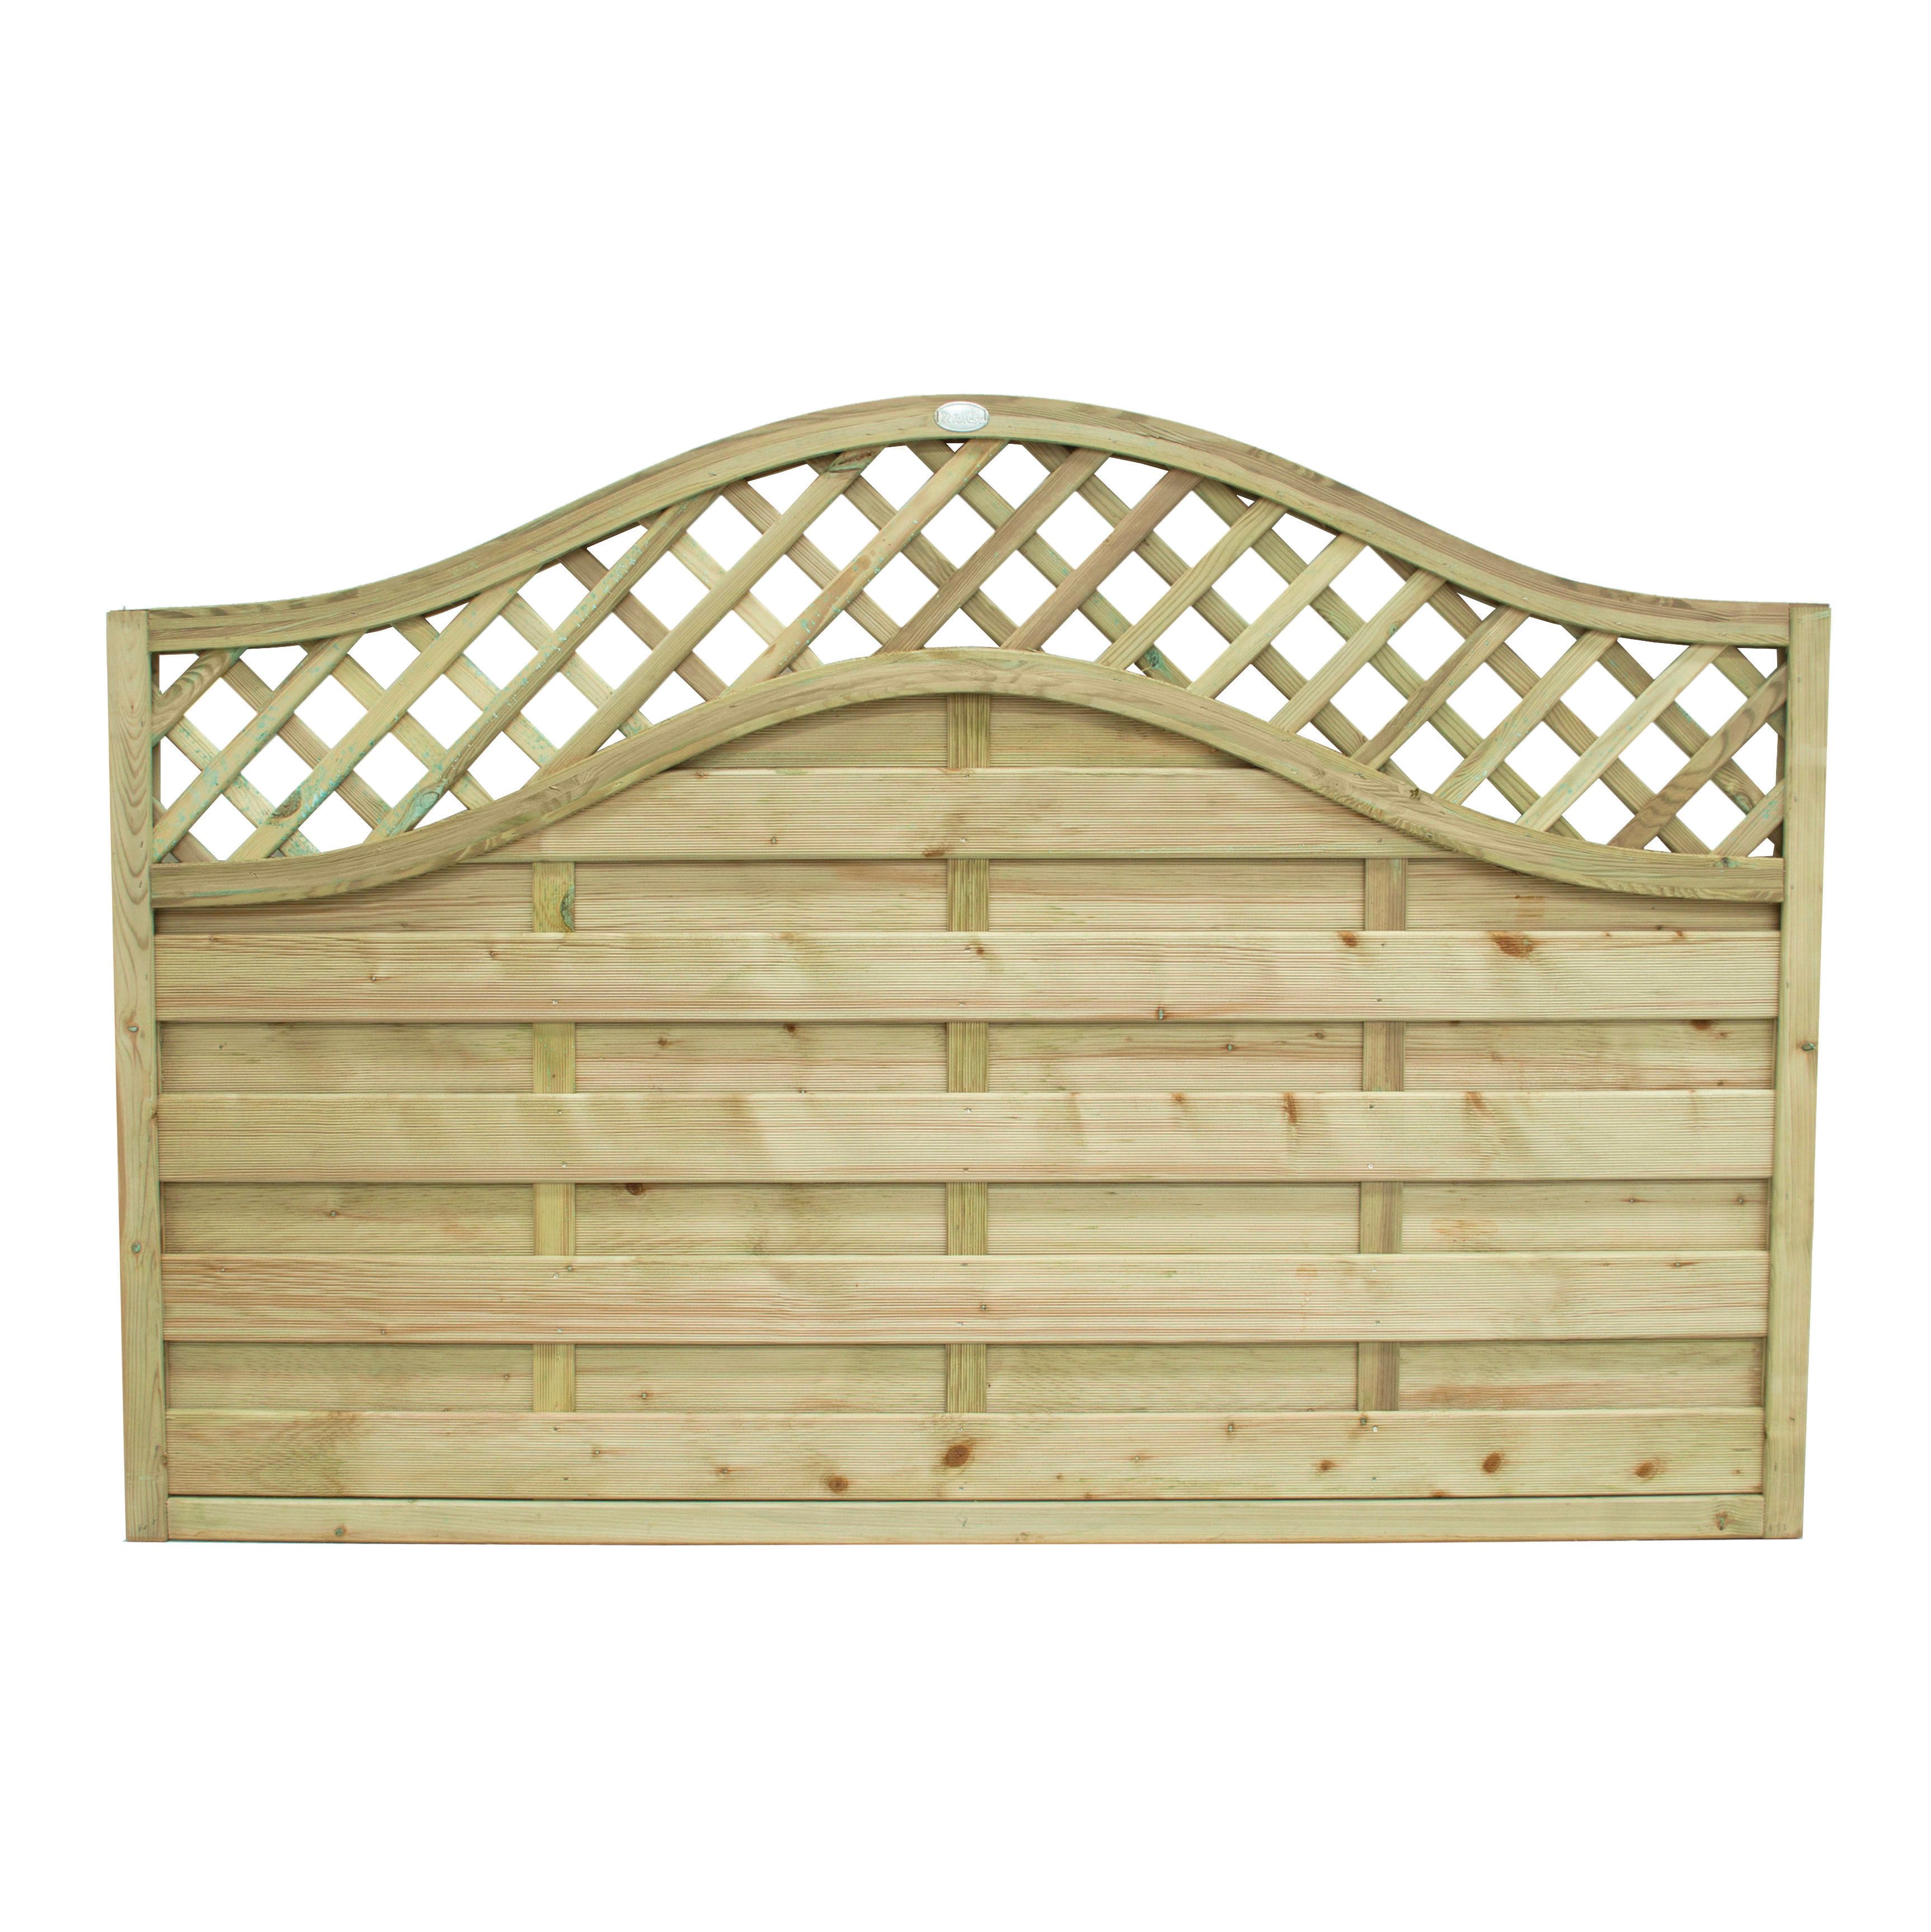 Image of Forest Garden Pressure Treated Bristol Fence Panel - 1800 x 1200mm - 6 x 4ft - Pack of 5